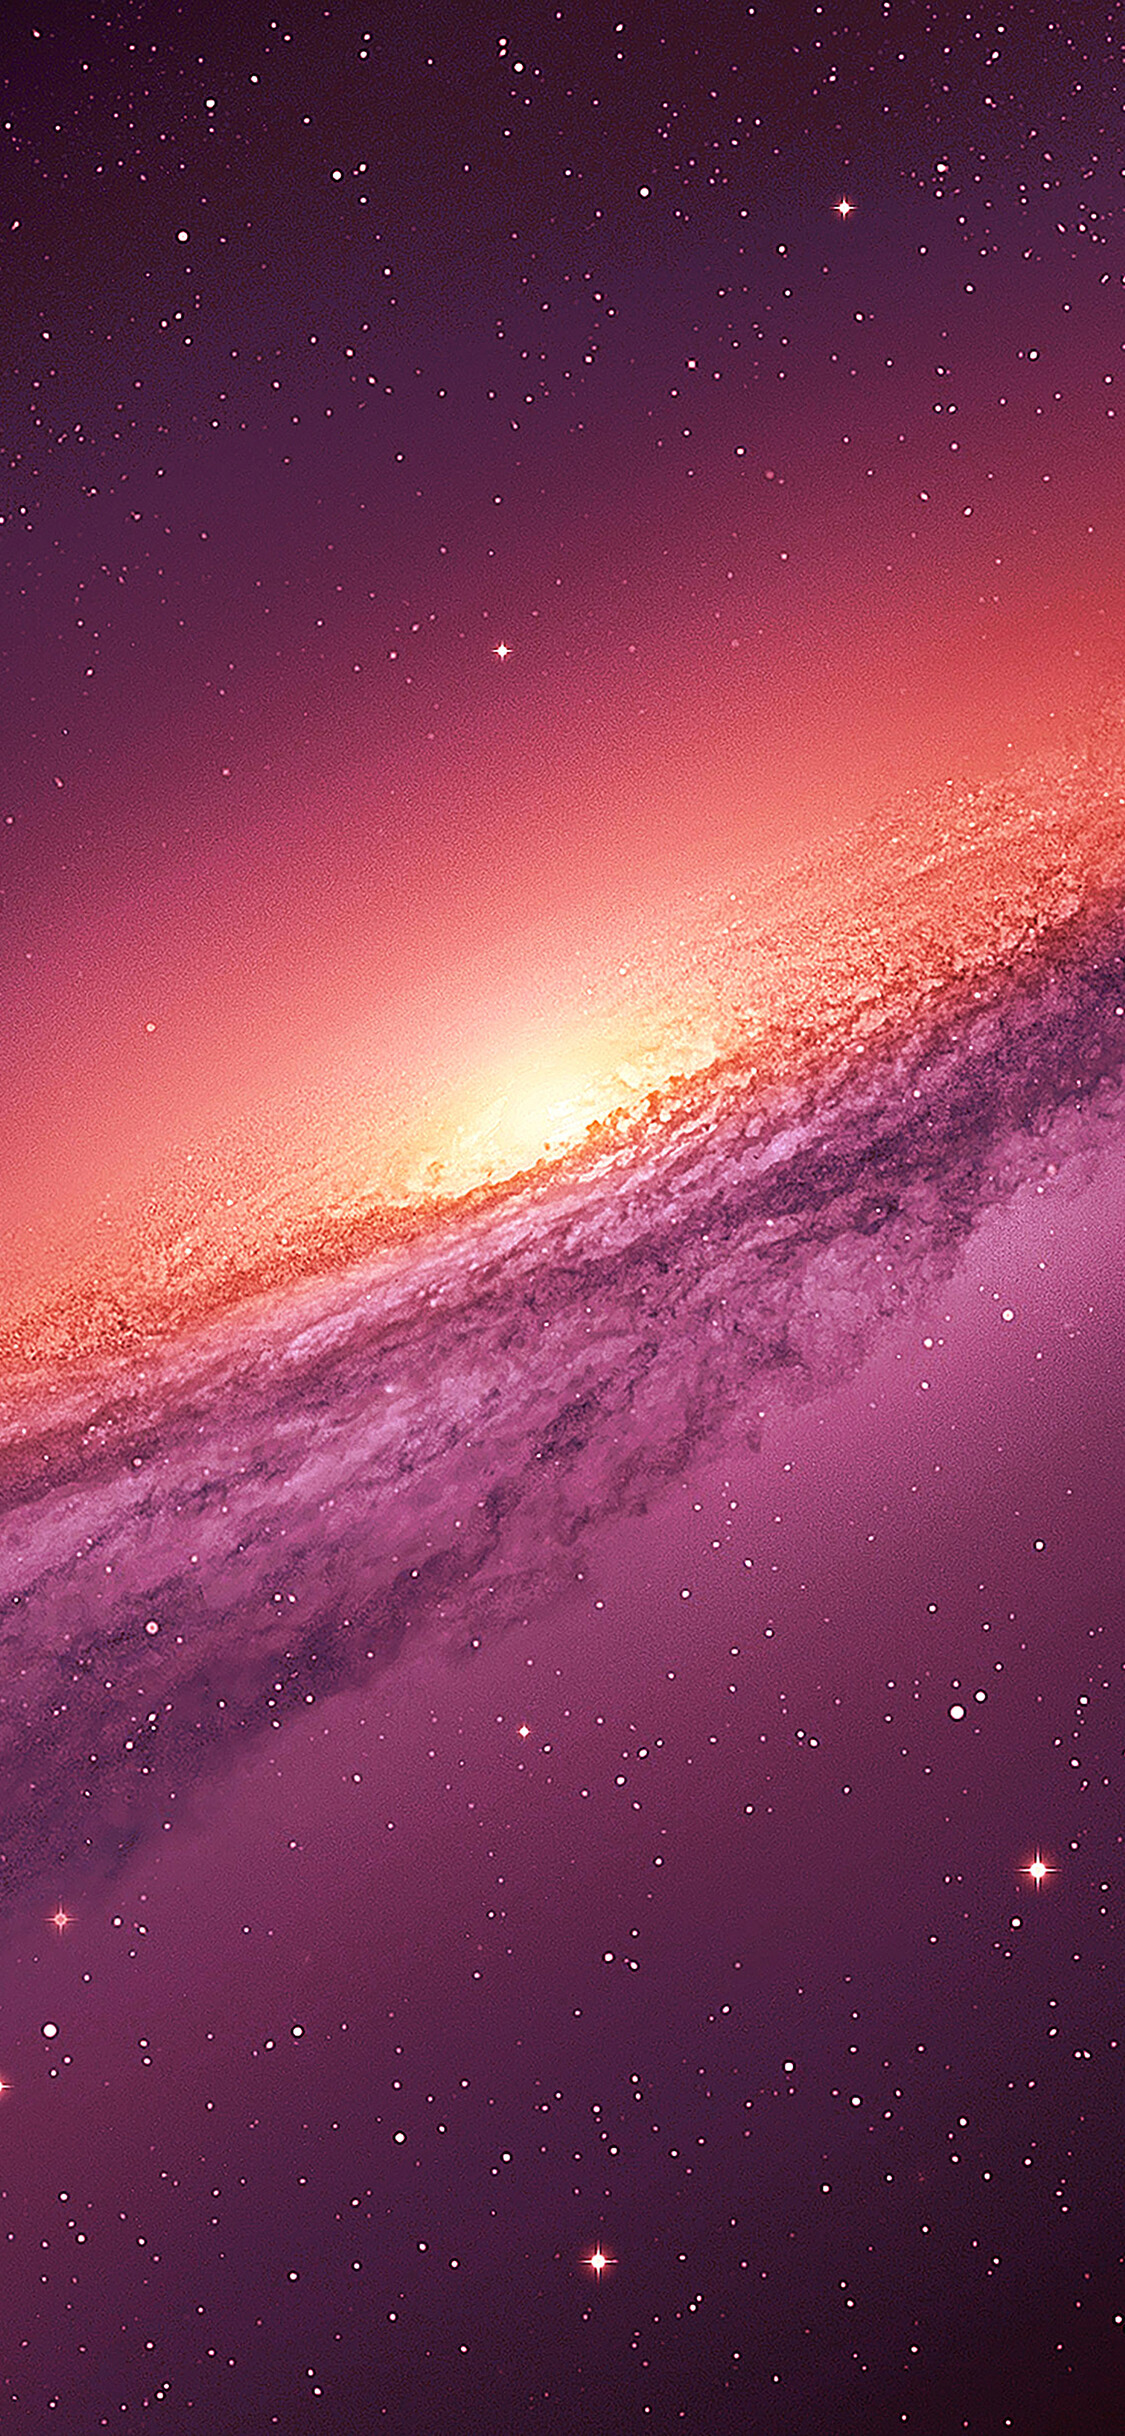 Galaxy: A concentrations of millions or billions of stars, together with gas clouds and pockets of dust. 1130x2440 HD Wallpaper.